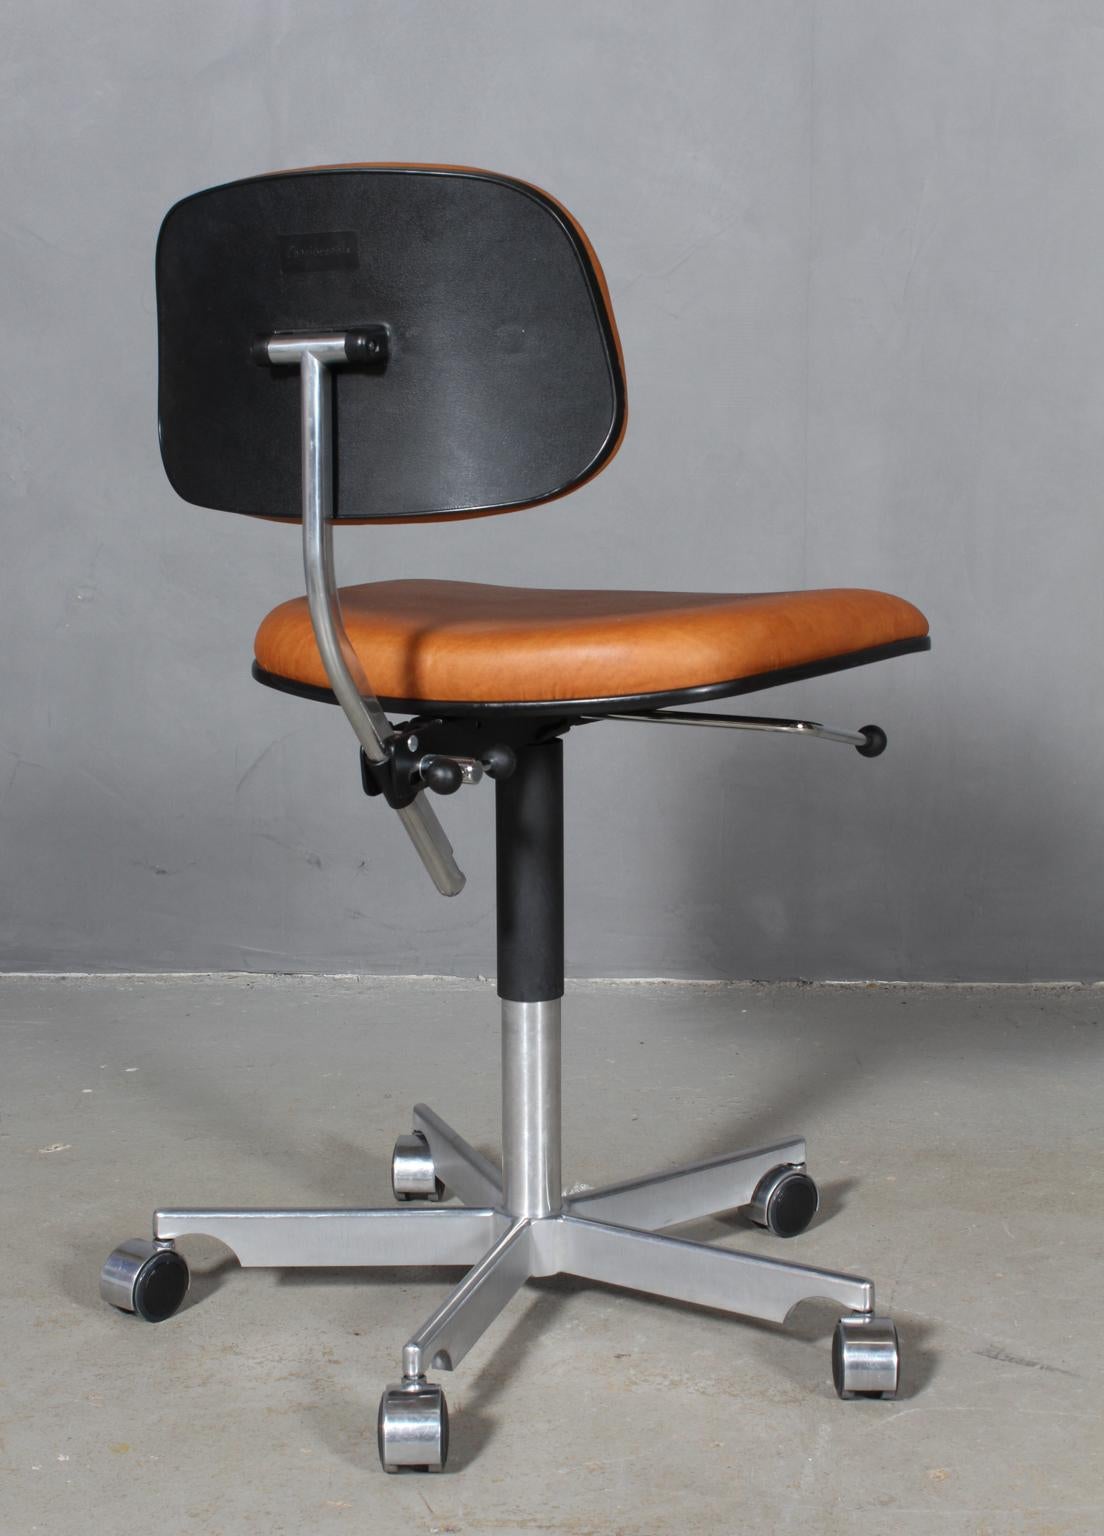 Kevi Office Chair by Jørgen Rasmussen In Good Condition For Sale In Esbjerg, DK